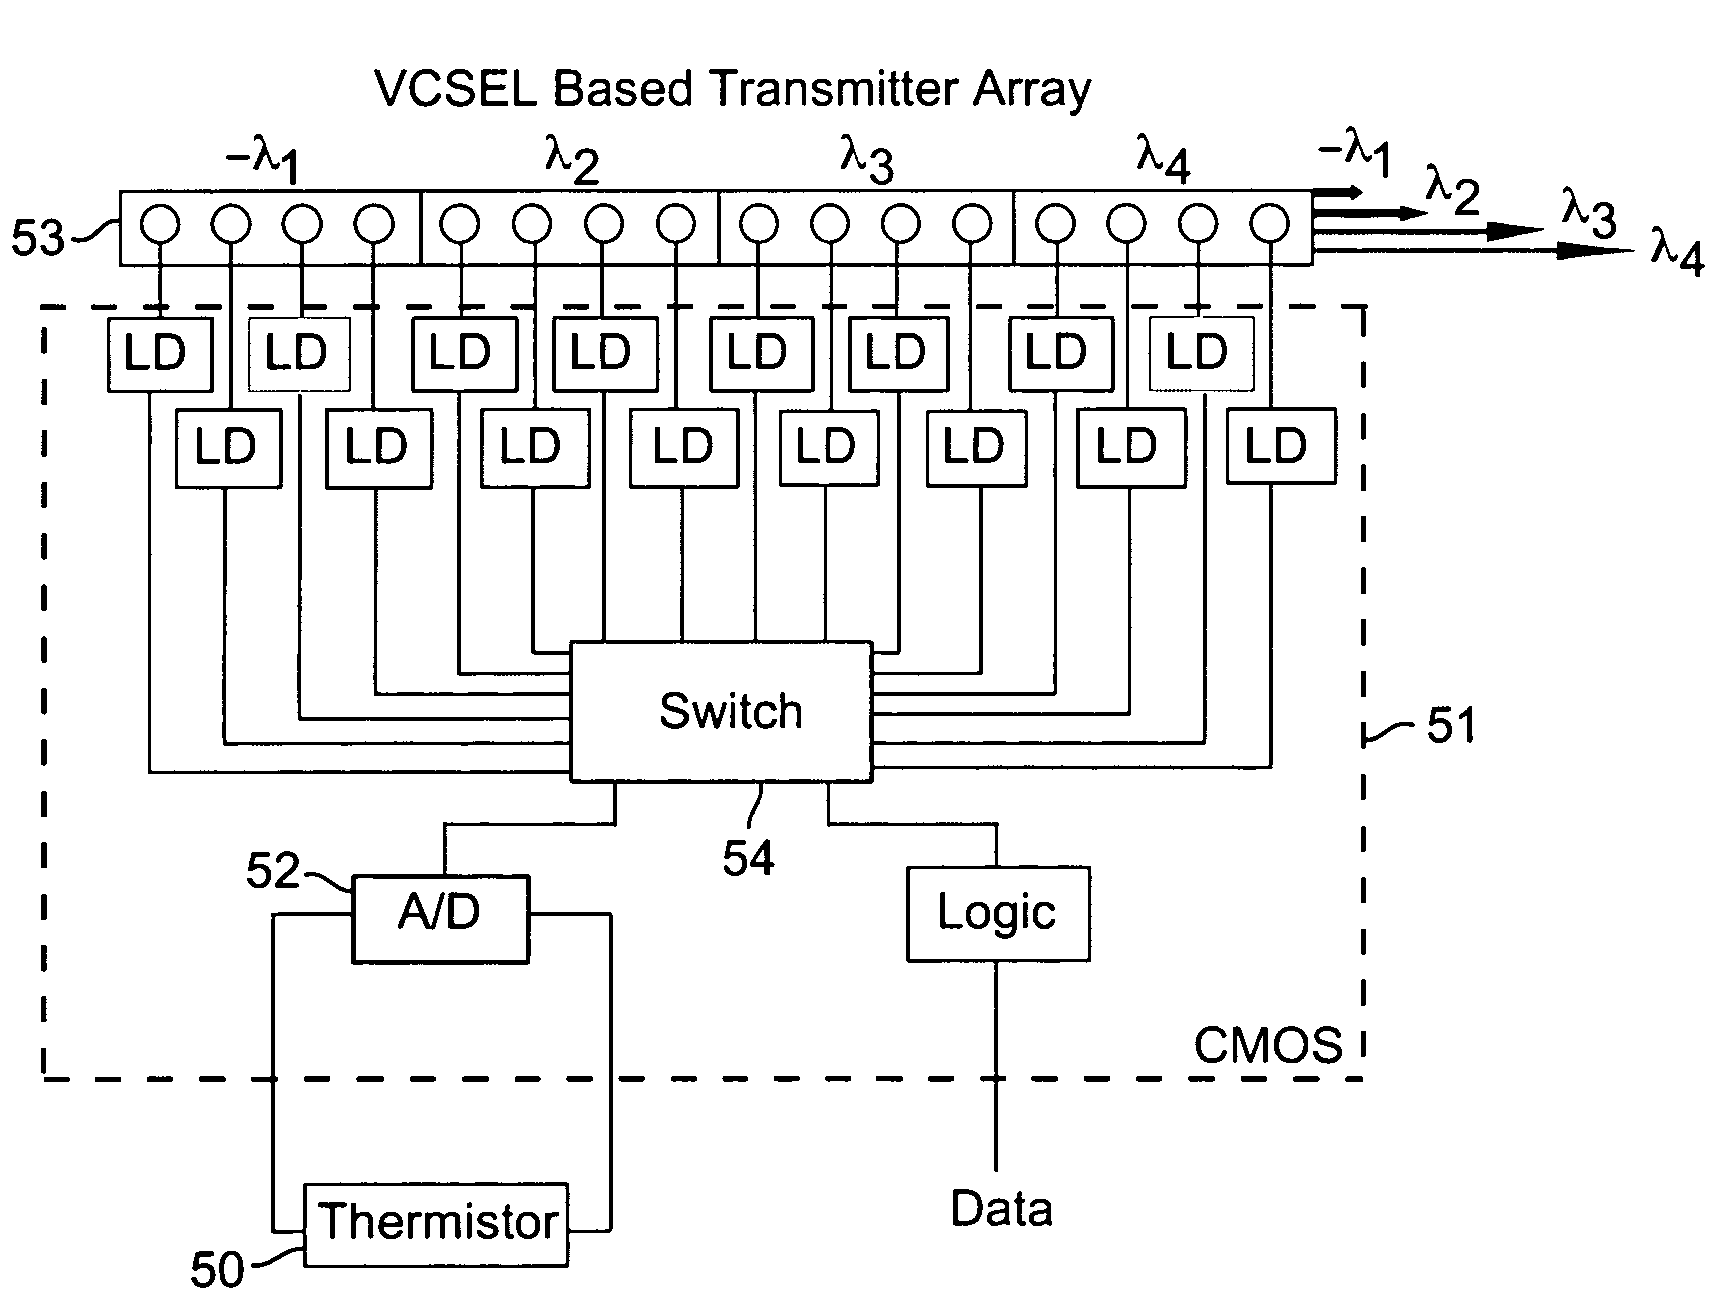 Broad temperature WDM transmitters and receivers for coarse wavelength division multiplexed (CWDM) fiber communication systems